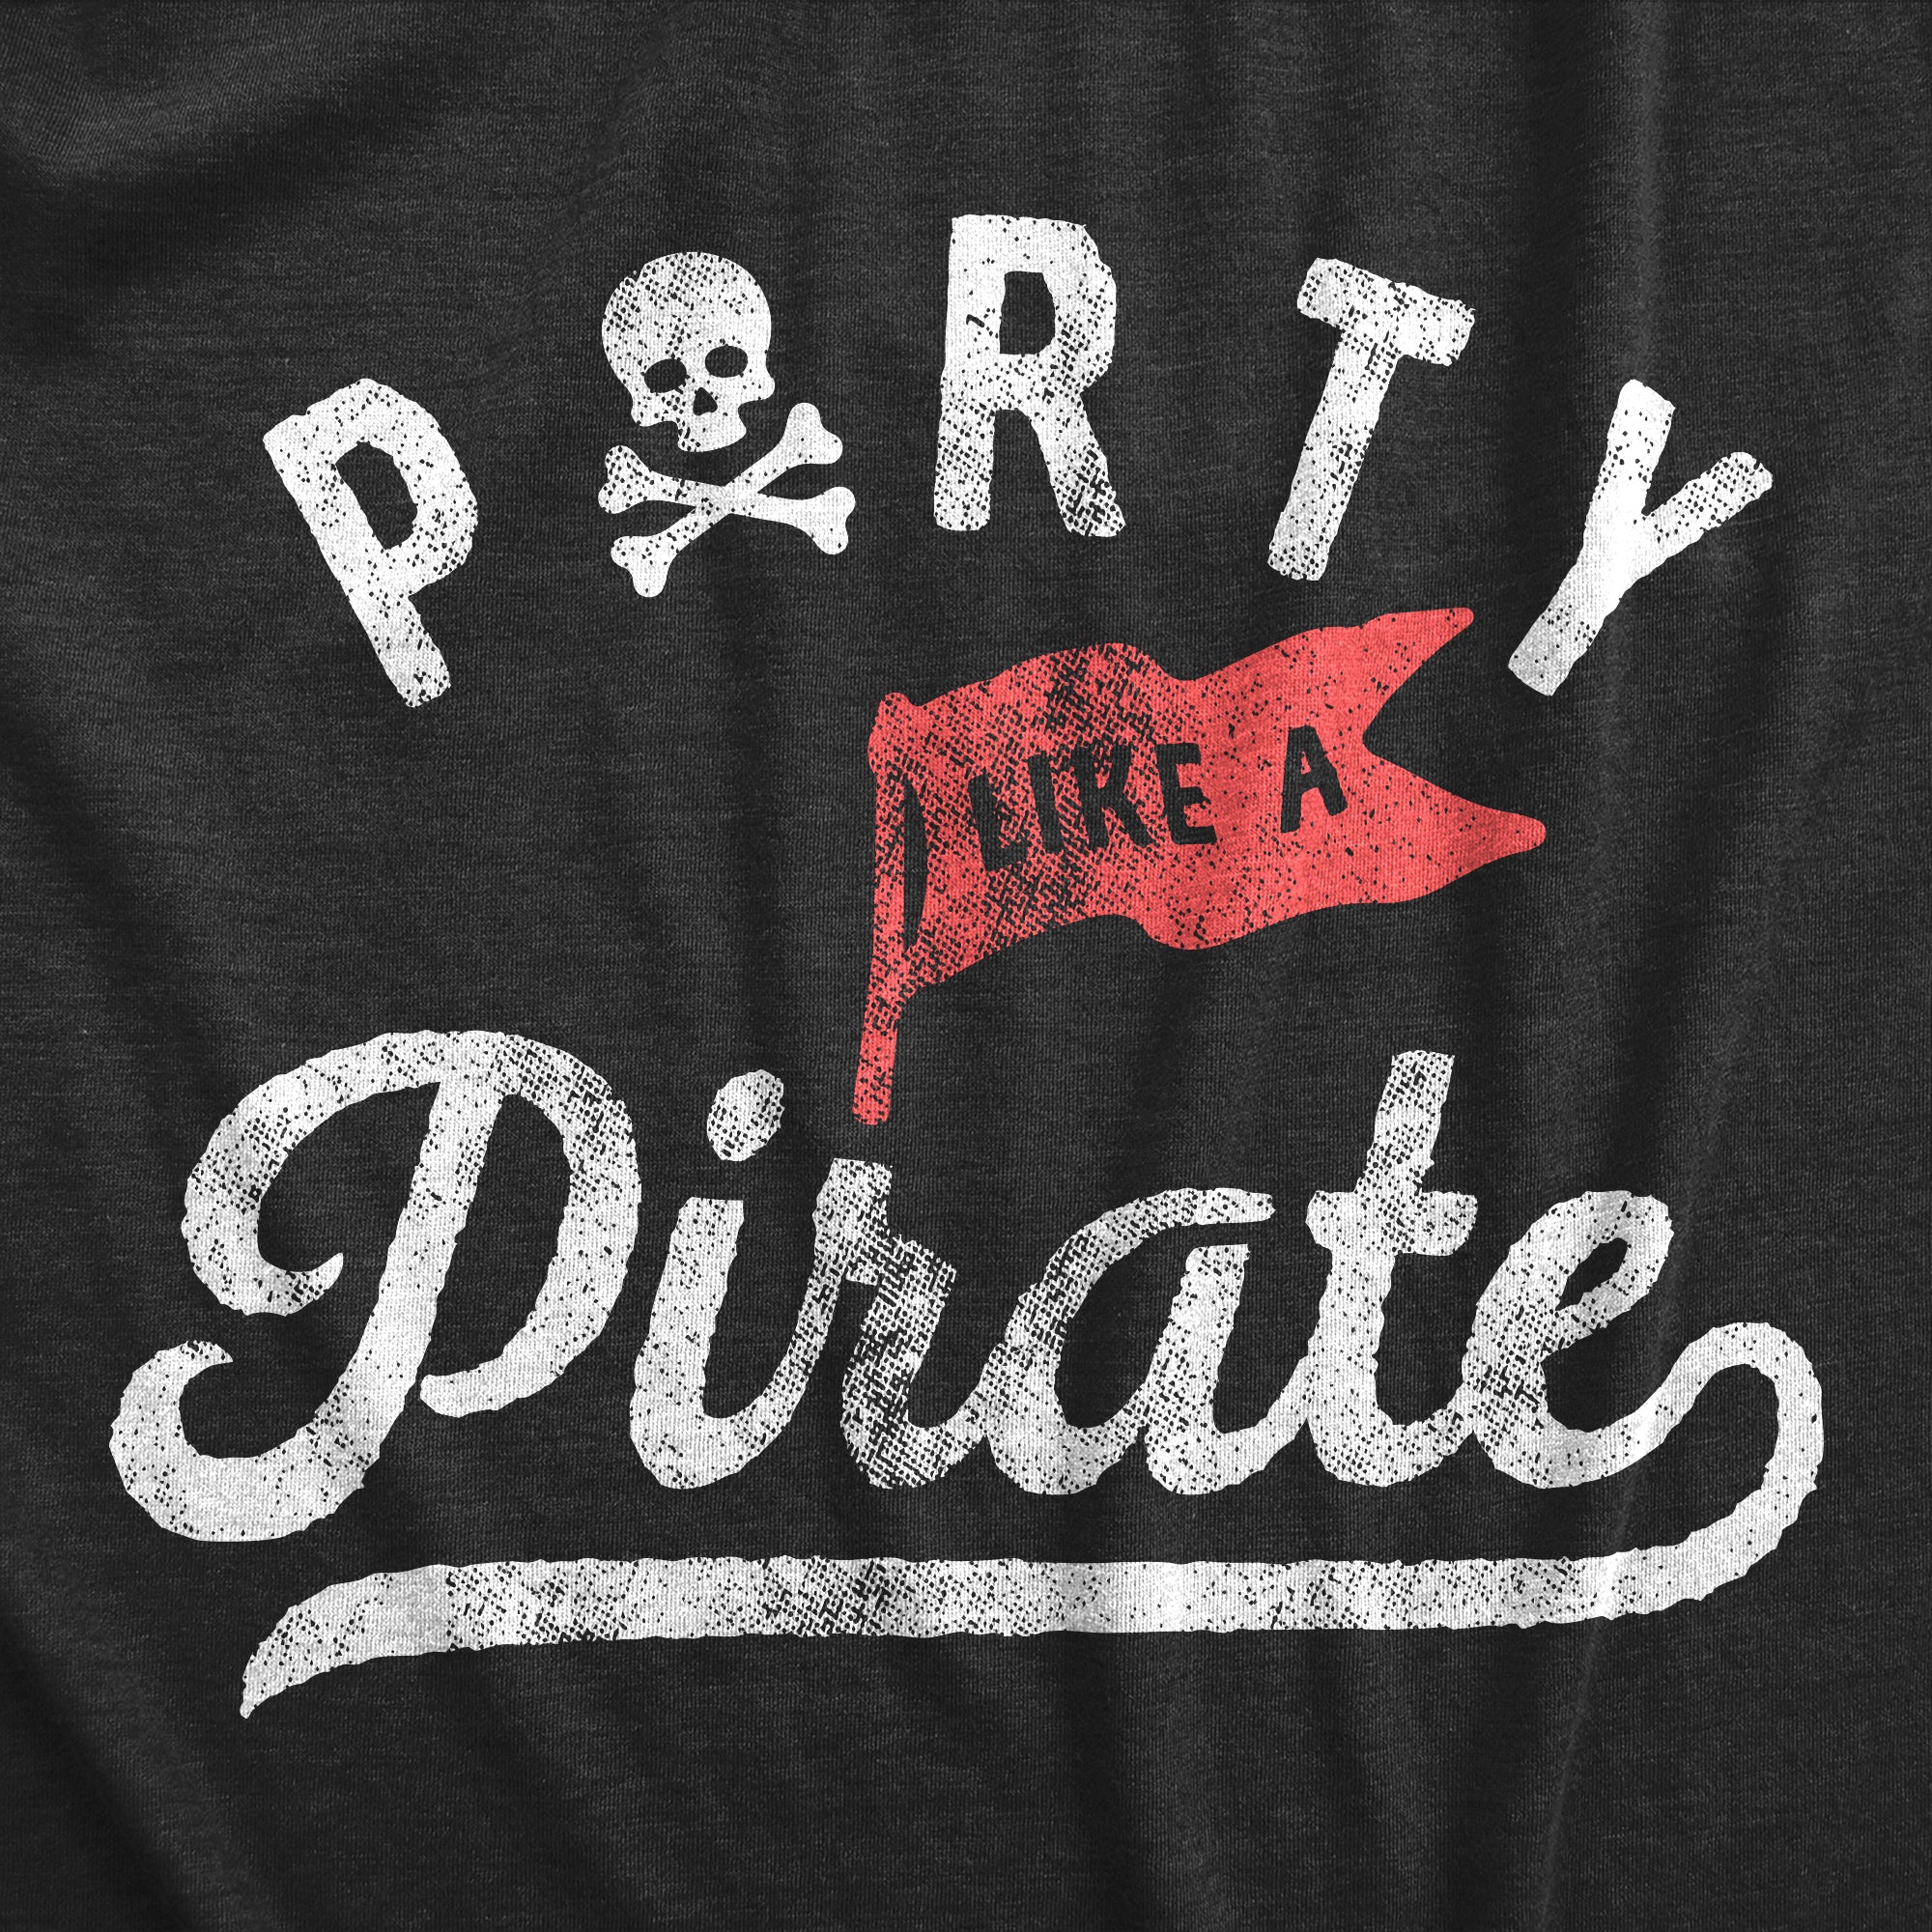 Funny Heather Black Party Like A Pirate Womens T Shirt Nerdy Drinking Tee